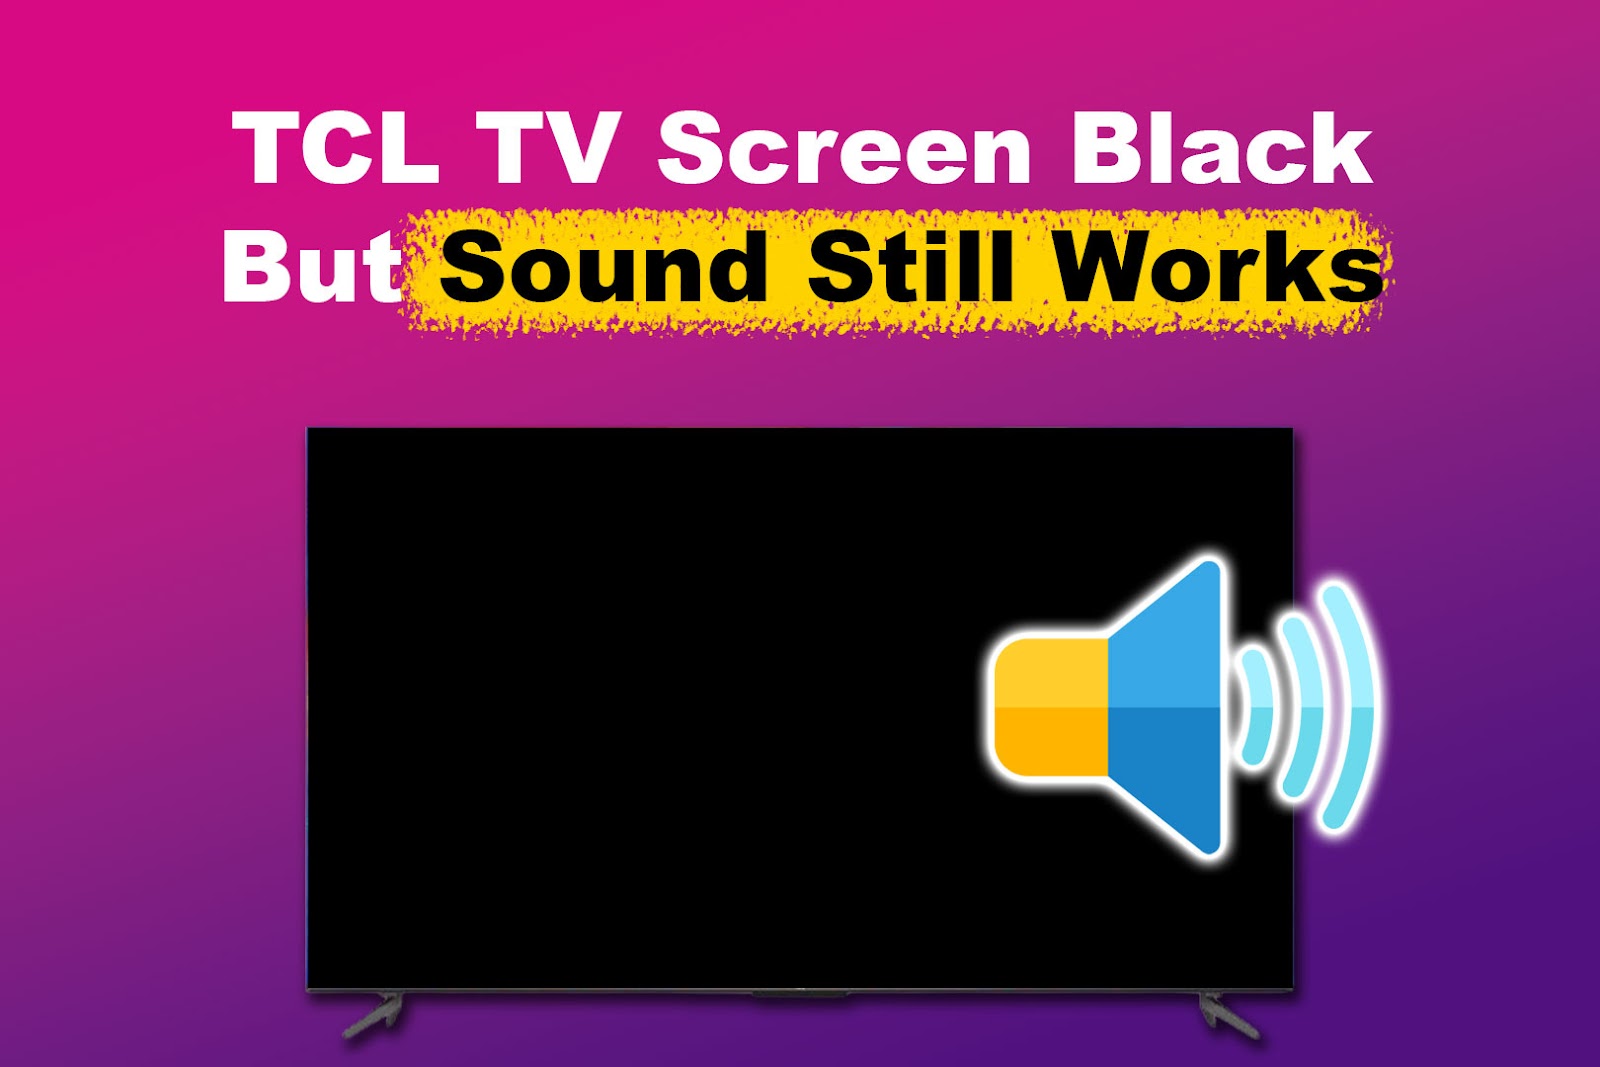 5 Ways to Fix a TCL TV Black Screen [When Sound Still Works]